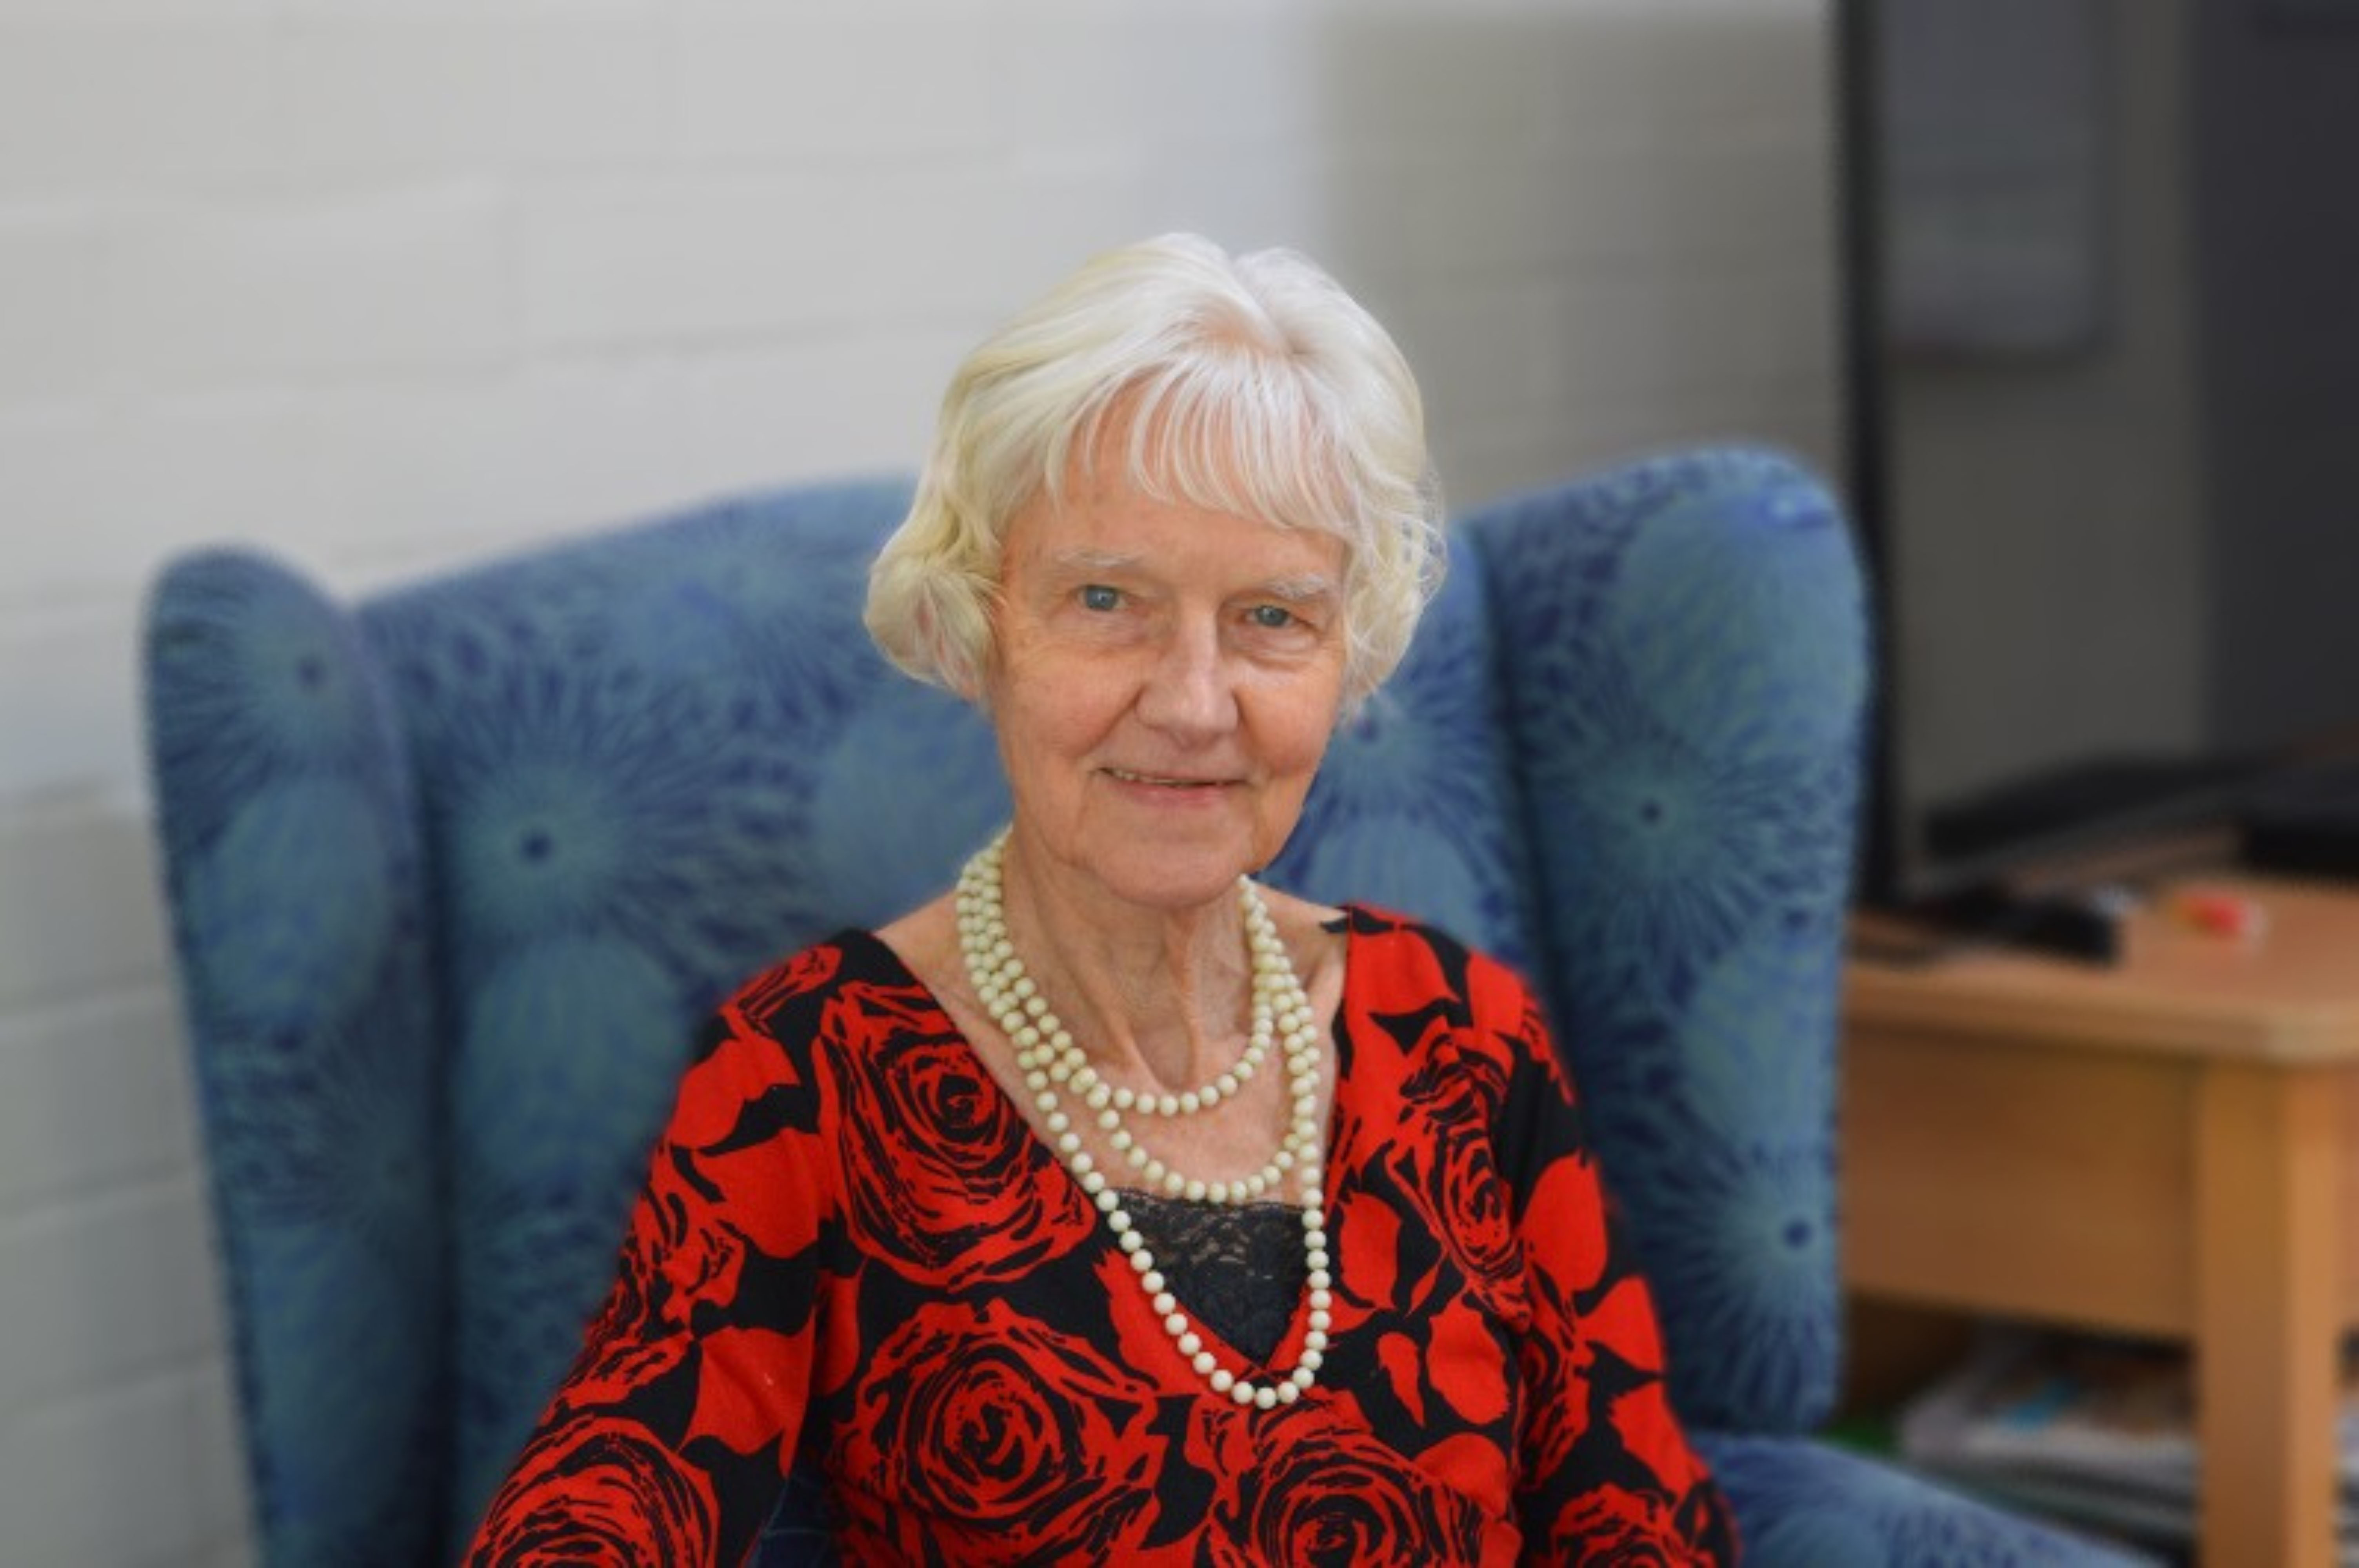 Cathy says residential aged care offers older people a sense of community and belonging in later life while receiving the proper care they need.